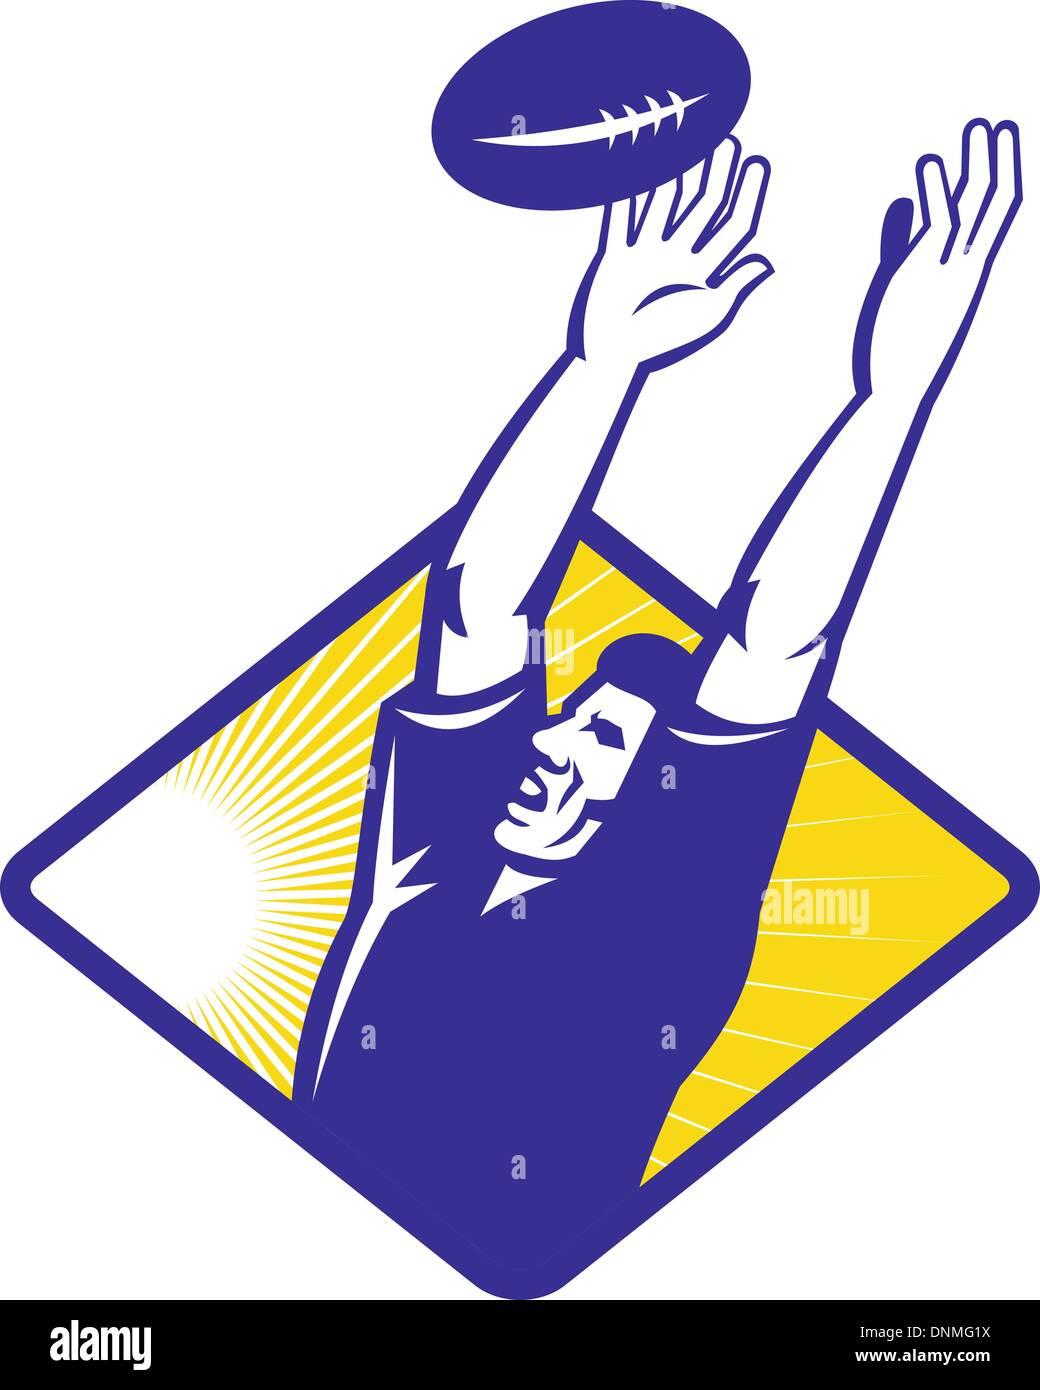 Illustration of a rugby player catching a line-out ball done in retro style set inside diamond. Stock Vector